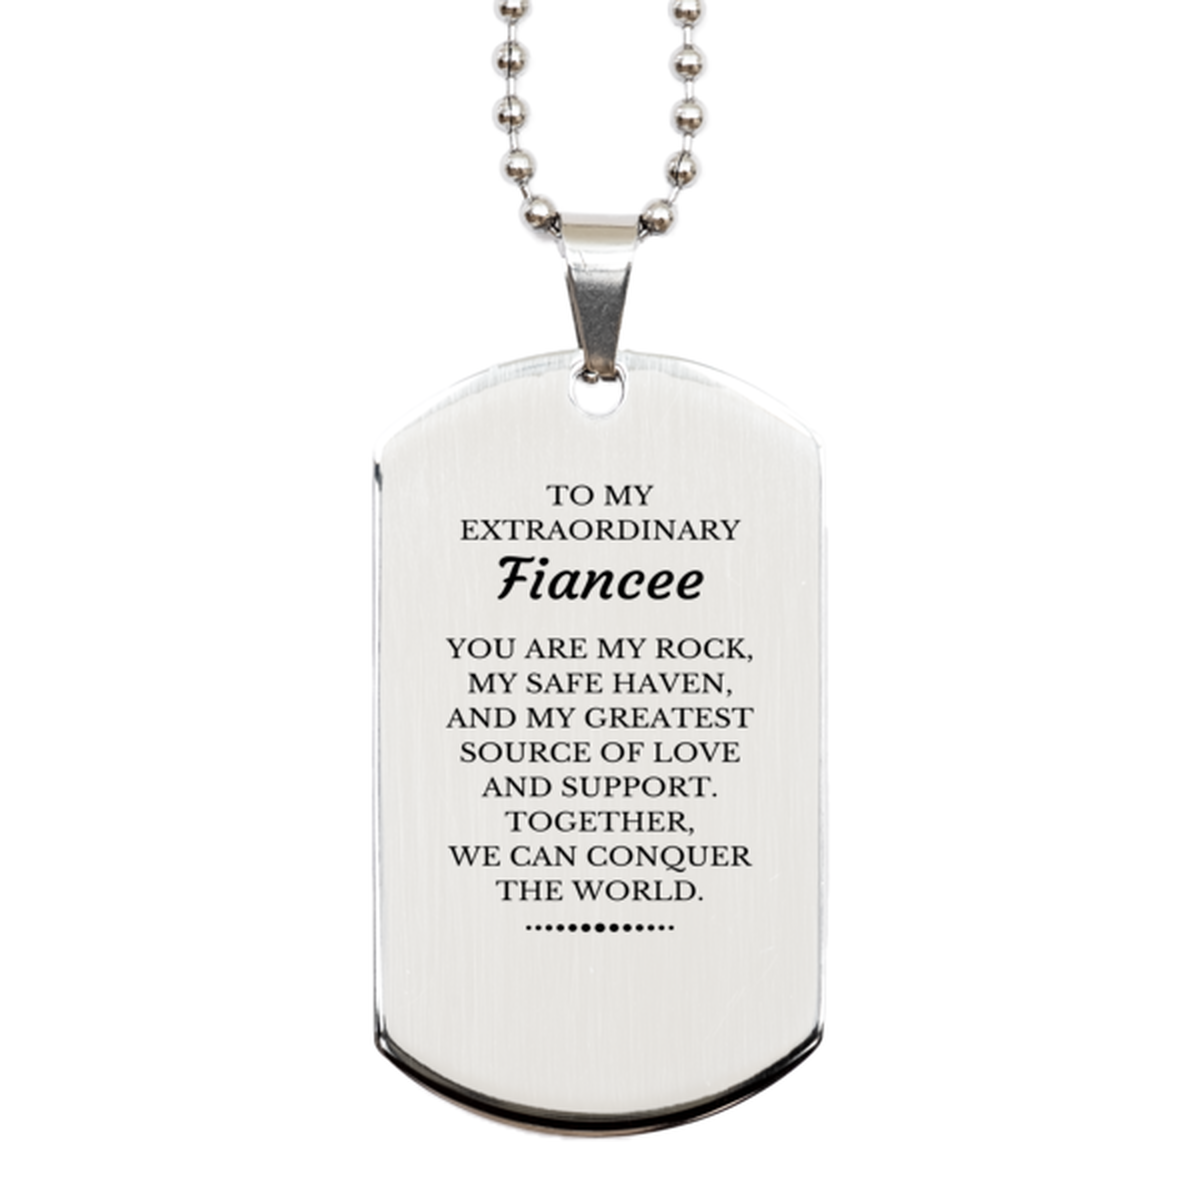 To My Extraordinary Fiancee Gifts, Together, we can conquer the world, Birthday Silver Dog Tag For Fiancee, Christmas Gifts For Fiancee